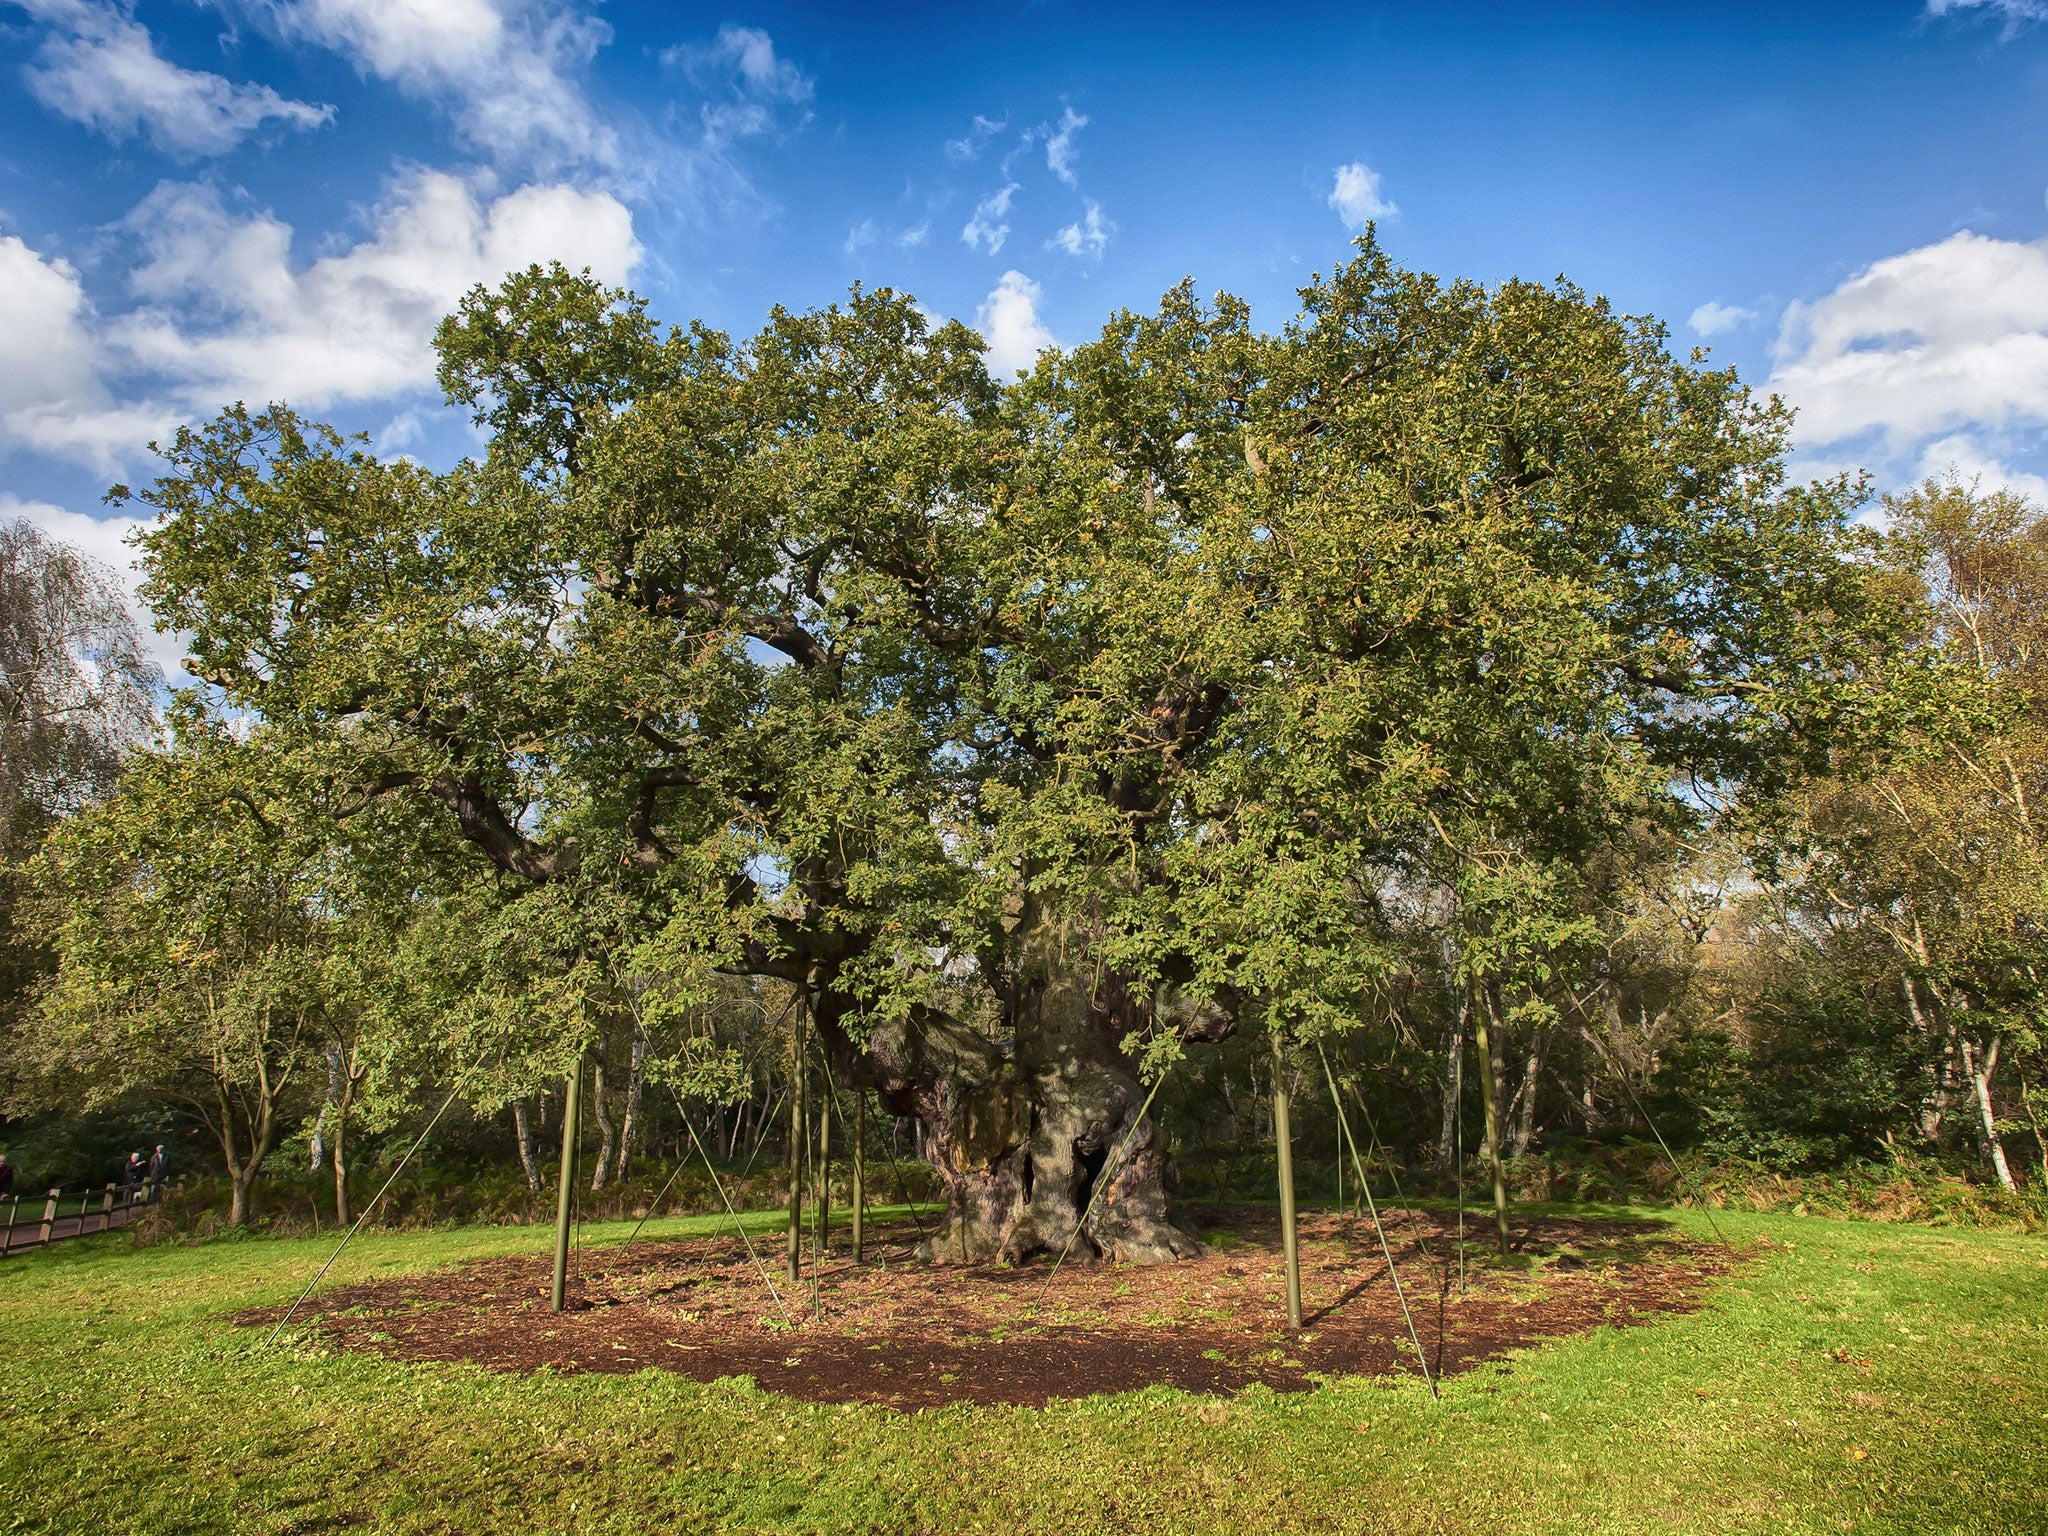 Major oak, Sherwood Forest: Probably the most famous old tree in the country, the Major Oak is estimated to be between 800 and 1,000 years old. Folklore suggests it was used as a hideout by Robin Hood and his merry men, while the Sheriff of Nottingham and